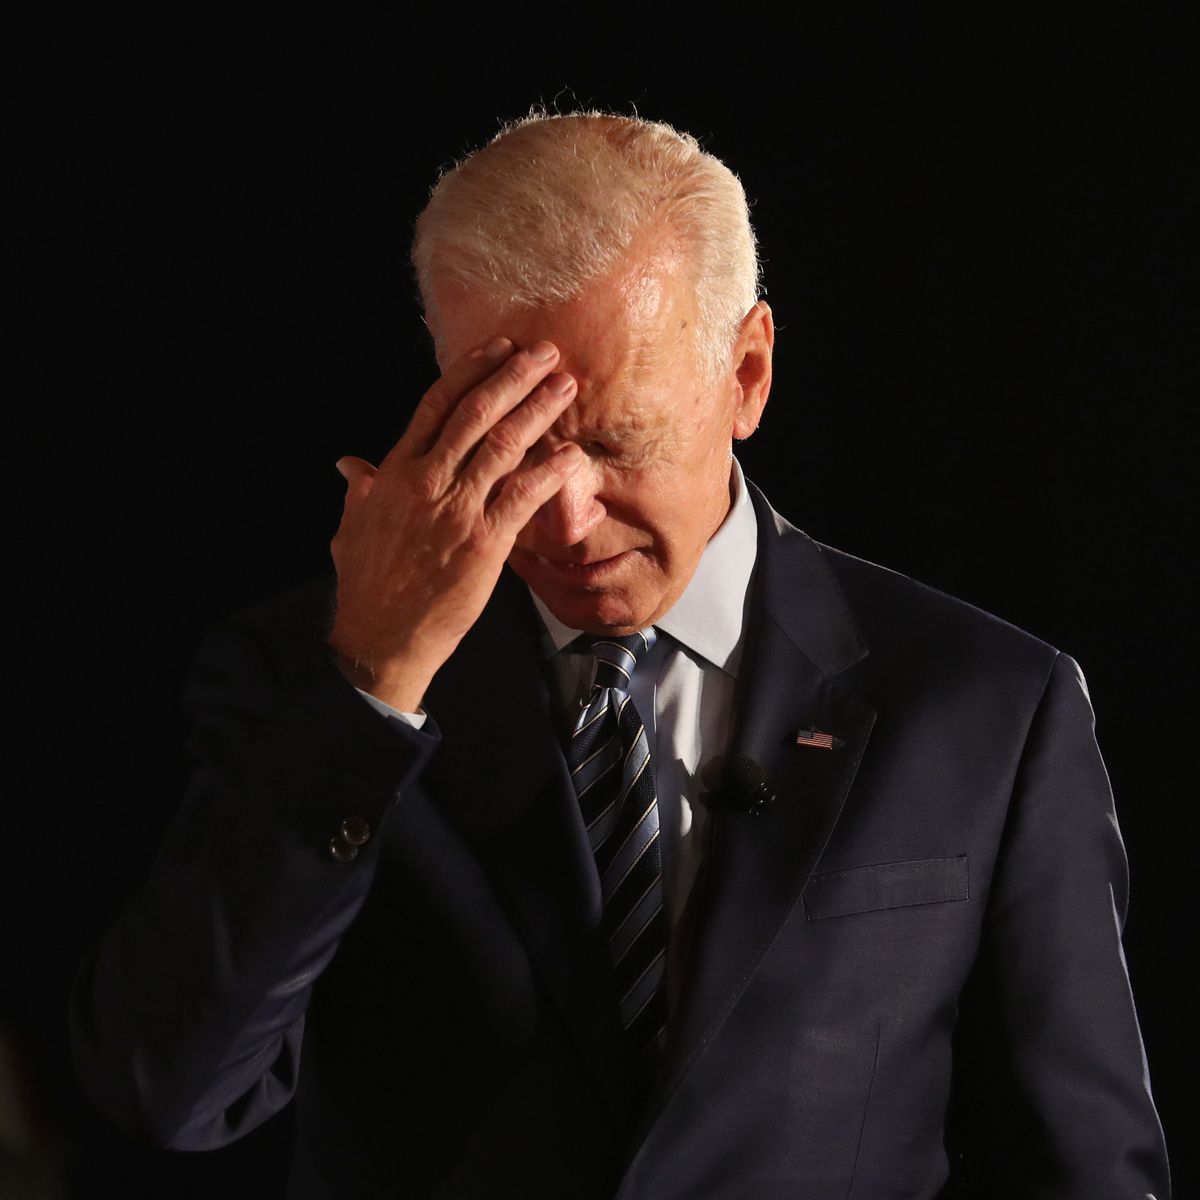 how many times has joe biden run for persident - Biden|President|Joe|Years|Trump|Delaware|Vice|Time|Obama|Senate|States|Law|Age|Campaign|Election|Administration|Family|House|Senator|Office|School|Wife|People|Hunter|University|Act|State|Year|Life|Party|Committee|Children|Beau|Daughter|War|Jill|Day|Facts|Americans|Presidency|Joe Biden|United States|Vice President|White House|Law School|President Trump|Foreign Relations Committee|Donald Trump|President Biden|Presidential Campaign|Presidential Election|Democratic Party|Syracuse University|United Nations|Net Worth|Barack Obama|Judiciary Committee|Neilia Hunter|U.S. Senate|Hillary Clinton|New York Times|Obama Administration|Empty Store Shelves|Systemic Racism|Castle County Council|Archmere Academy|U.S. Senator|Vice Presidency|Second Term|Biden Administration